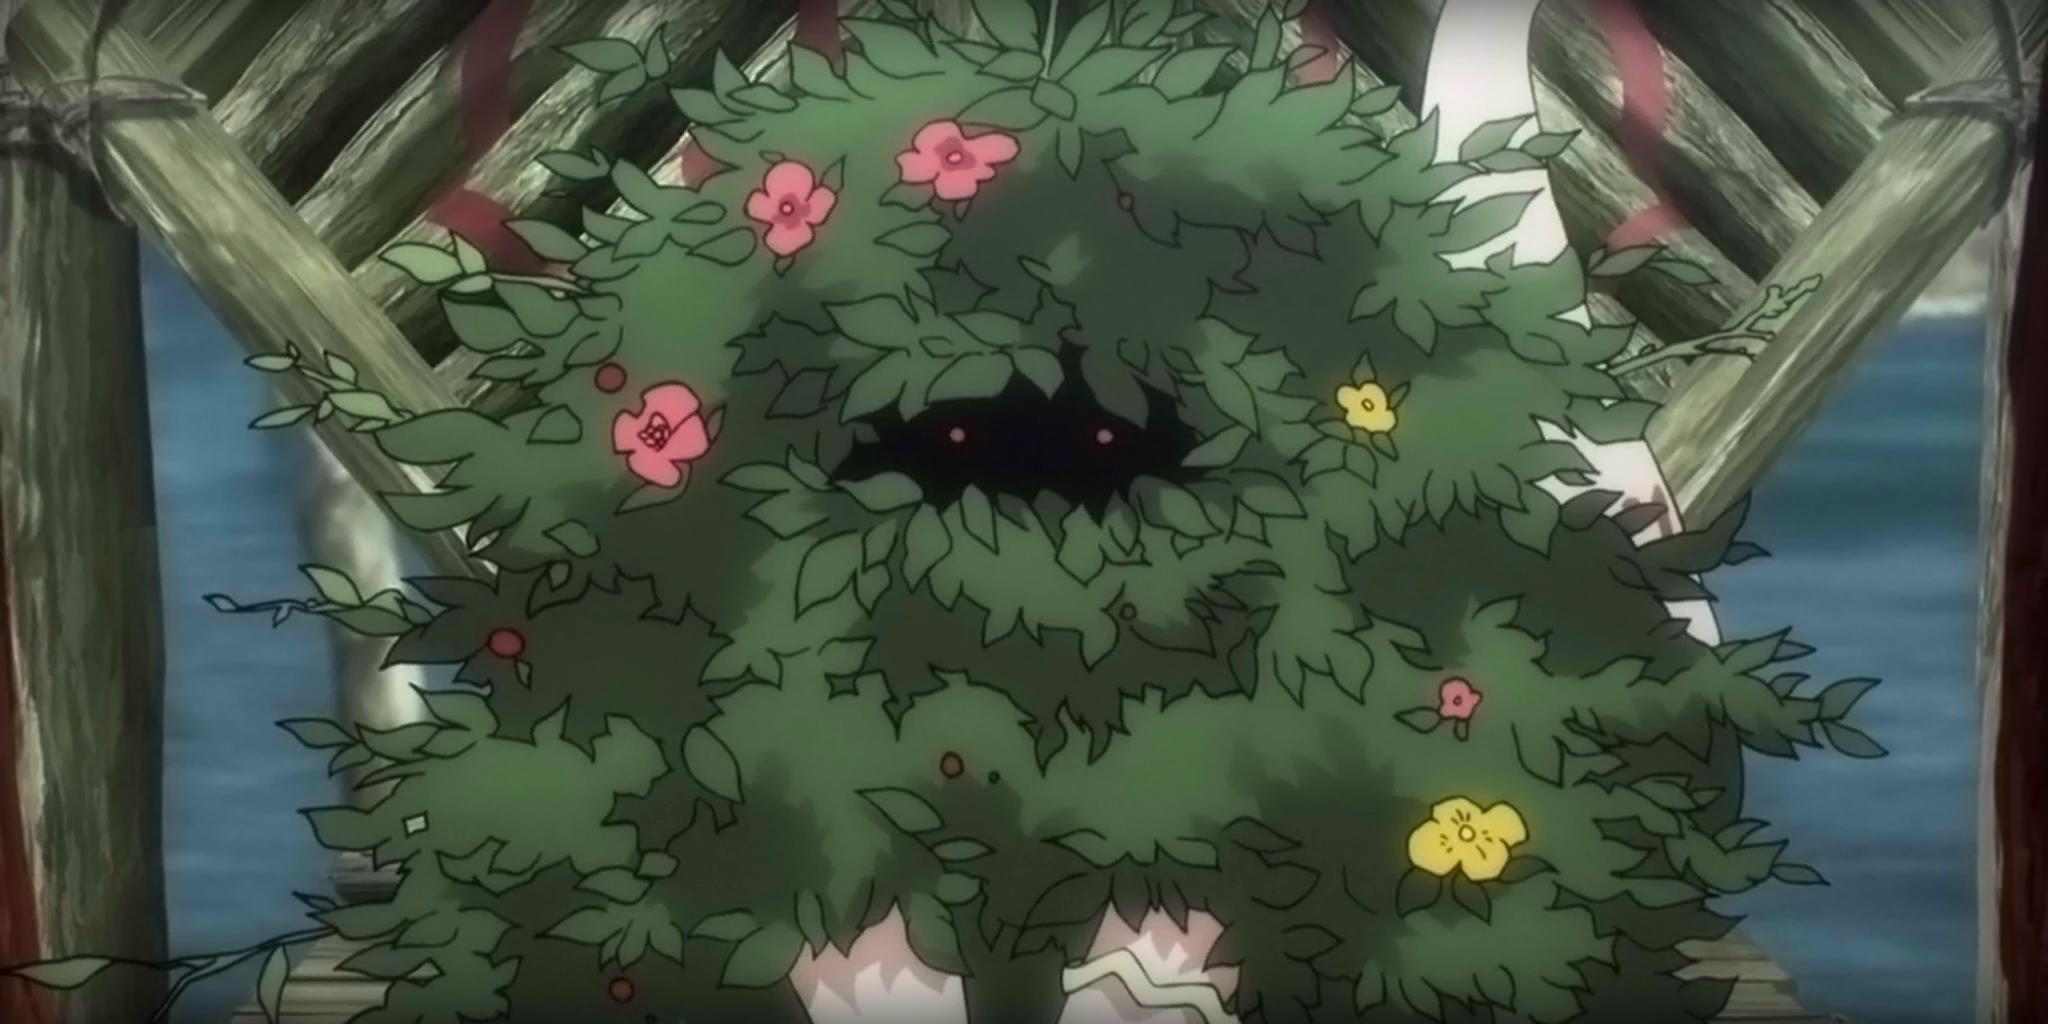 A Plant Monster?